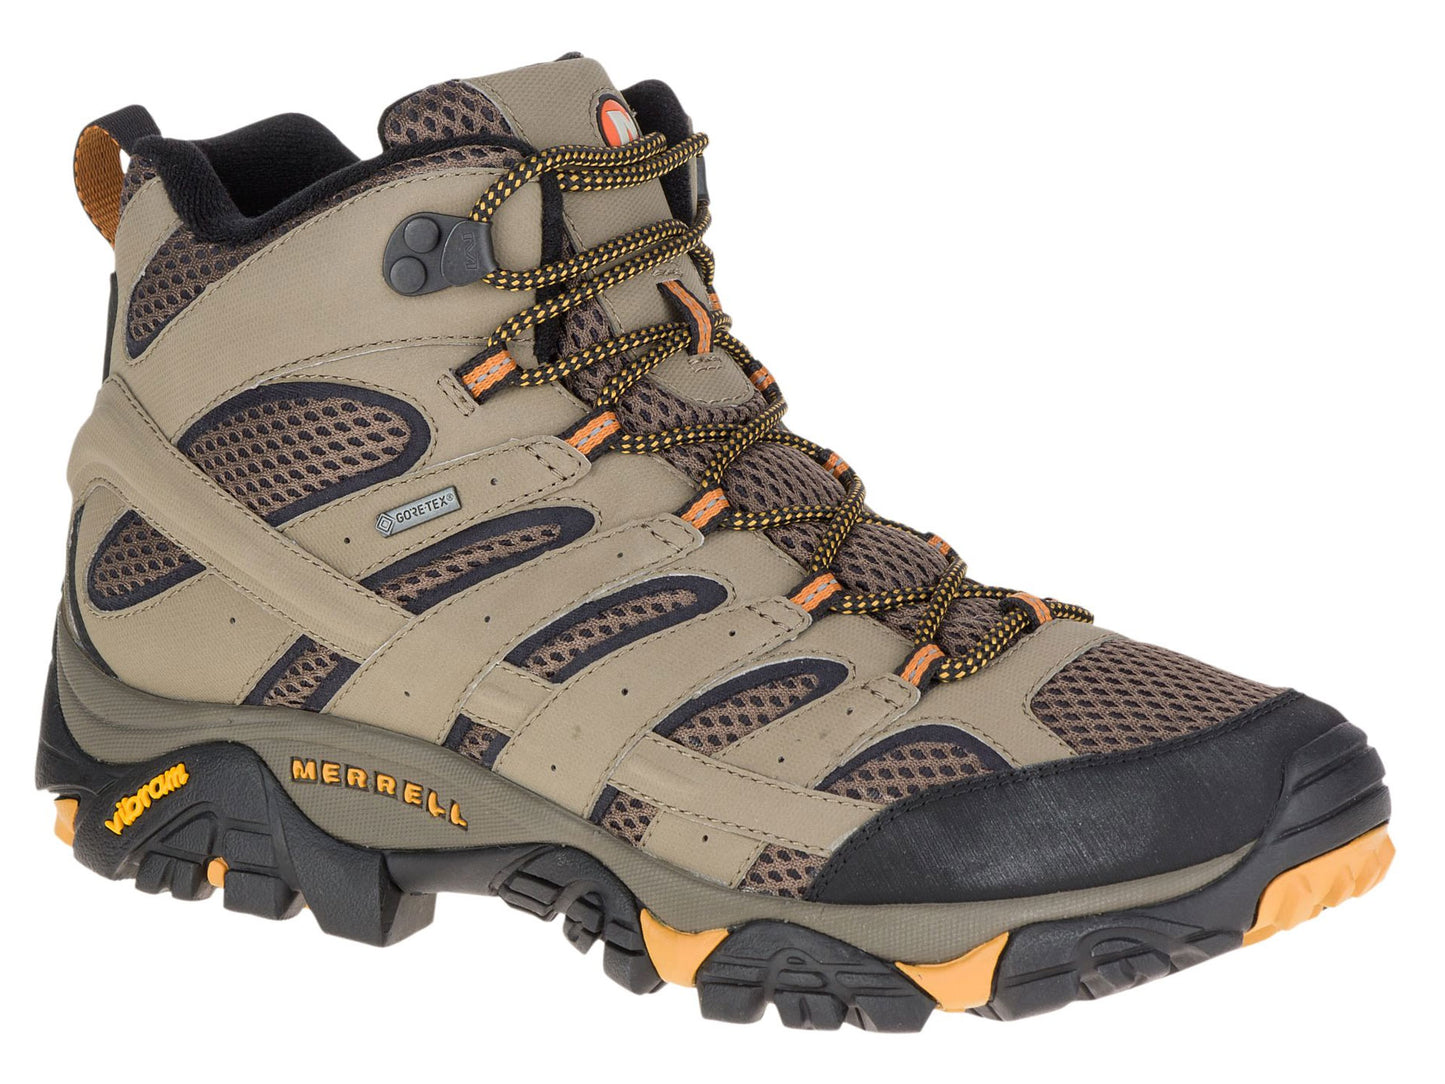 Moab 2 Mid Gore Tex Hiking Boots